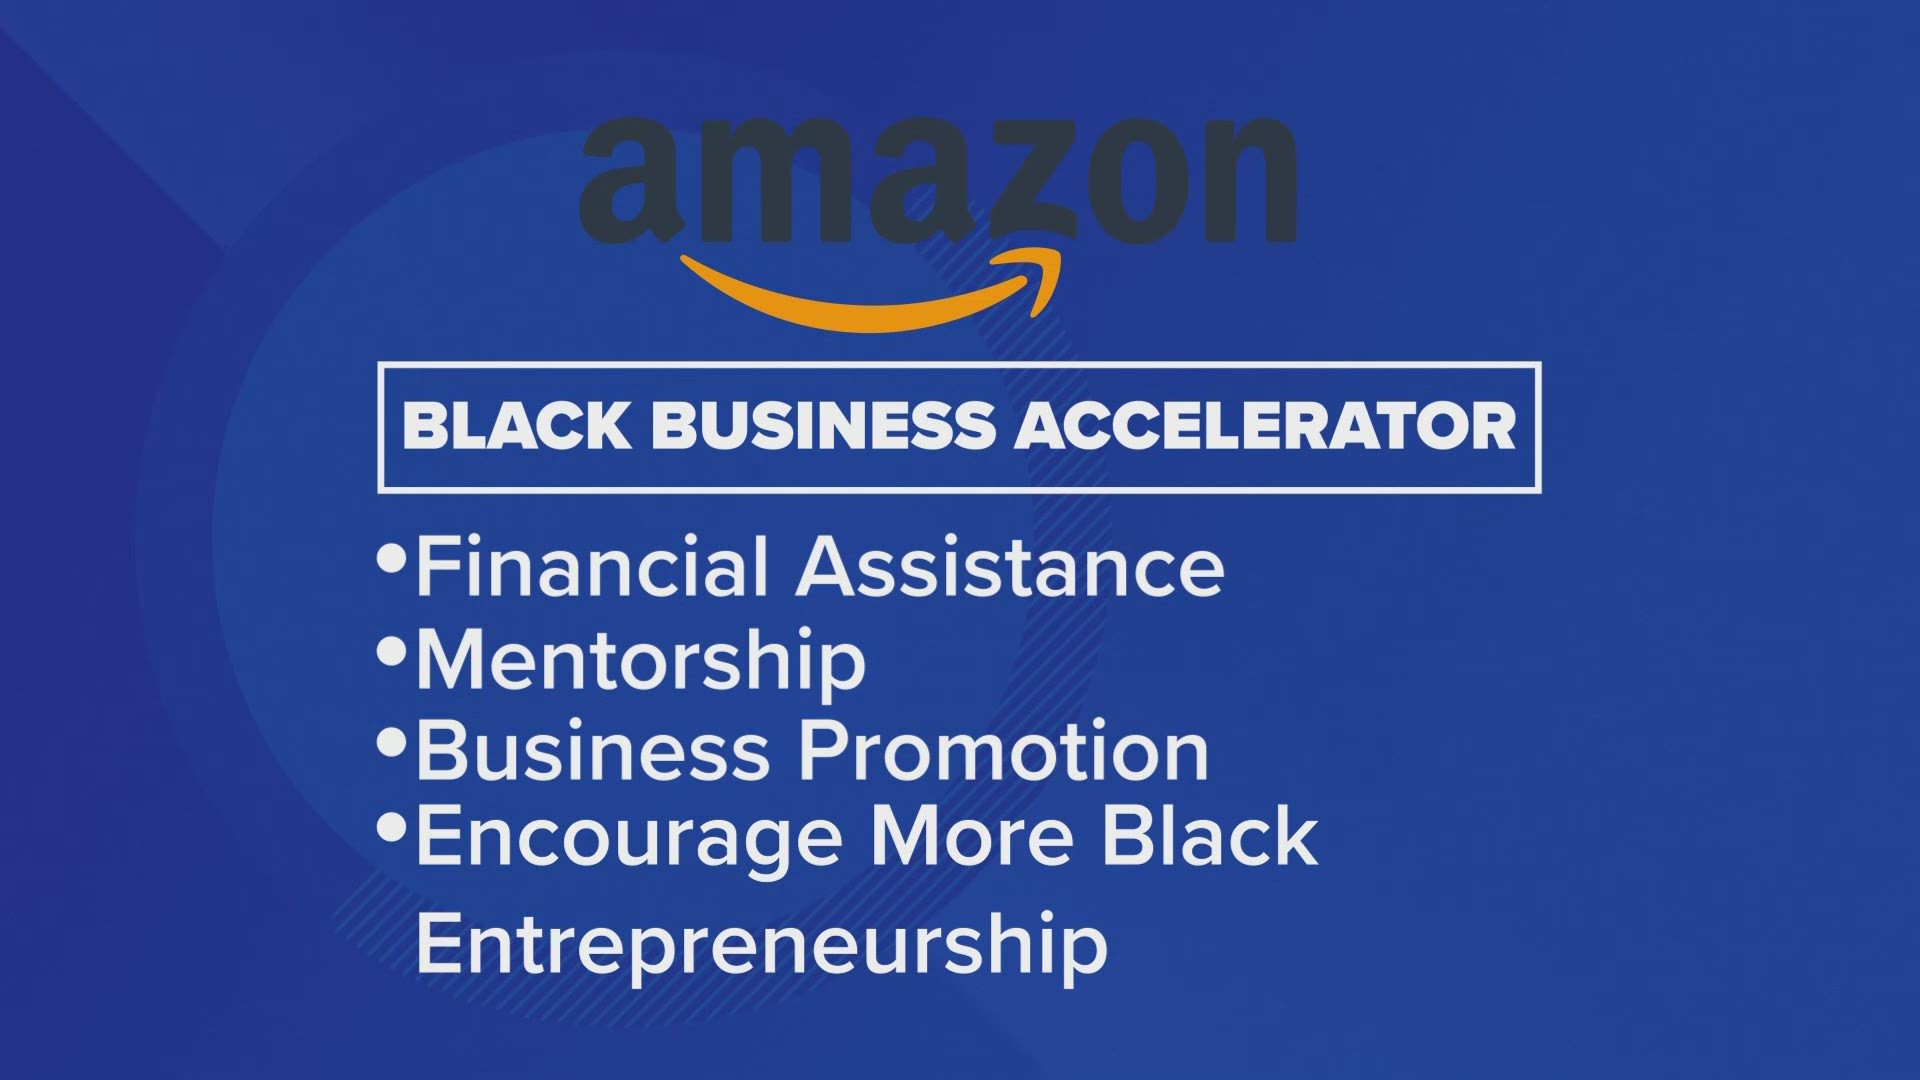 Also on Monday's Right on the Money, Amazon is offering a new program for Black entrepreneurs that includes grants, mentorship, and more.